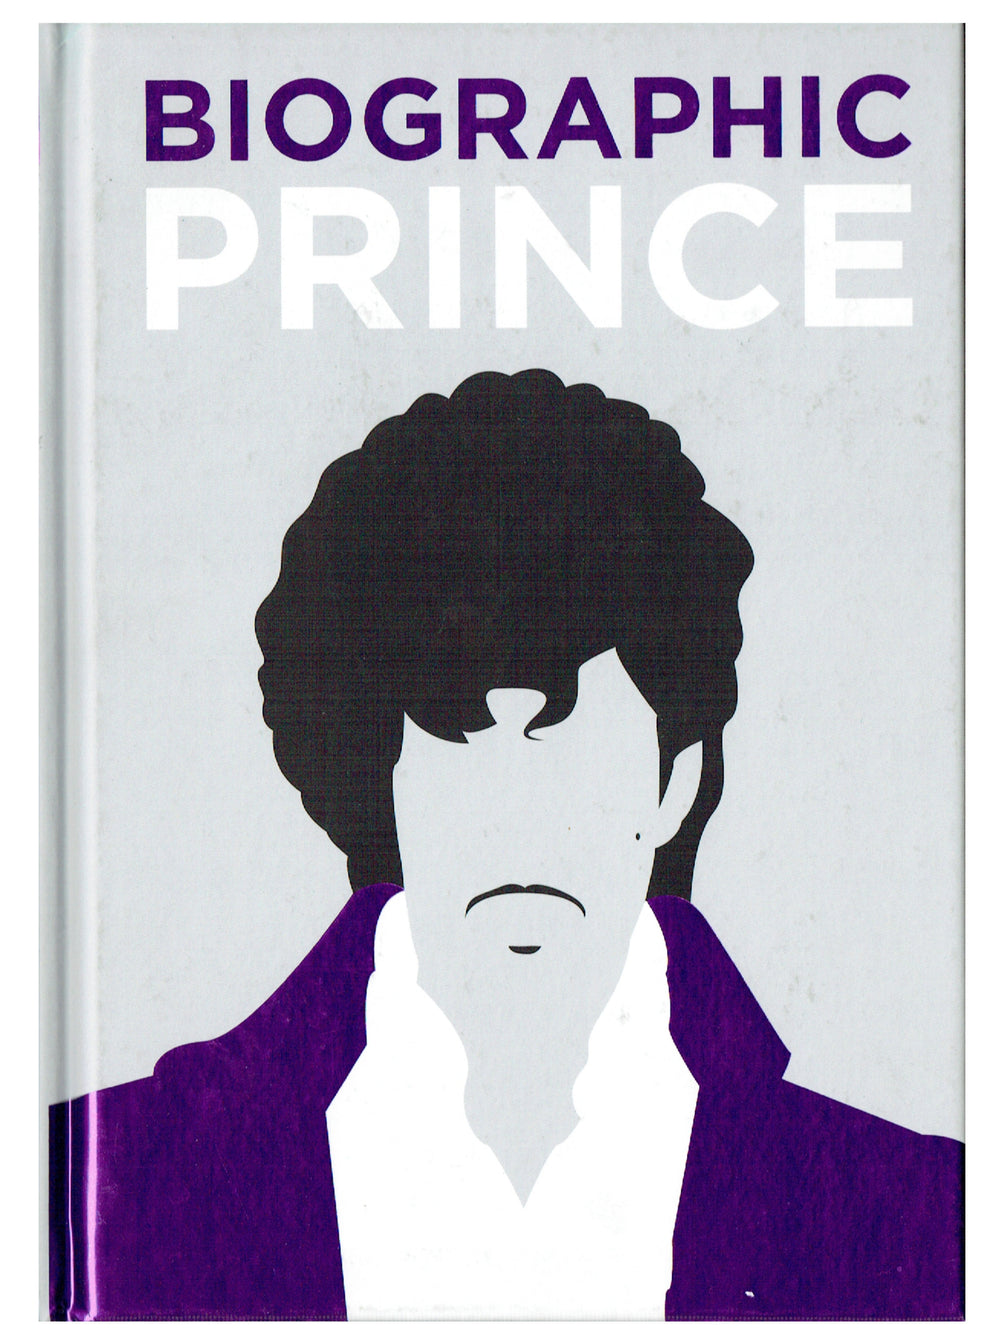 Prince – Great Lives in Graphic Form Hardbacked Book NEW